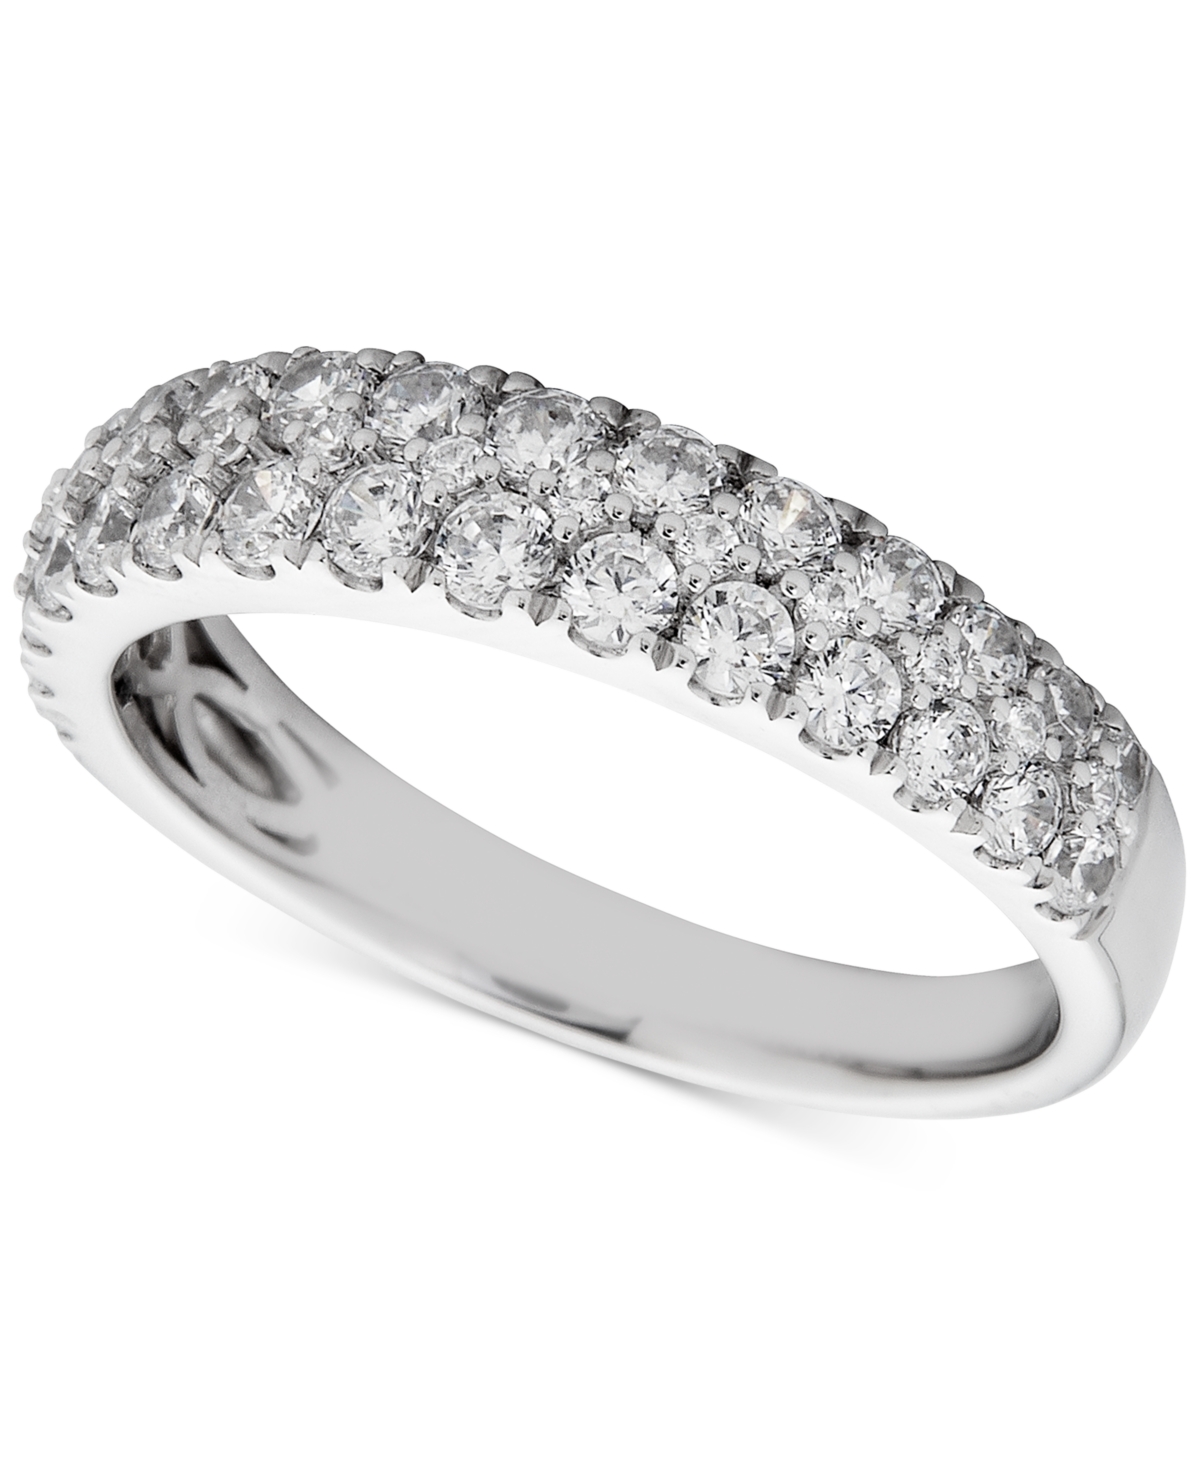 Diamond Double Row Band Ring (1 ct. t.w.) in 14k White Gold - White Gold